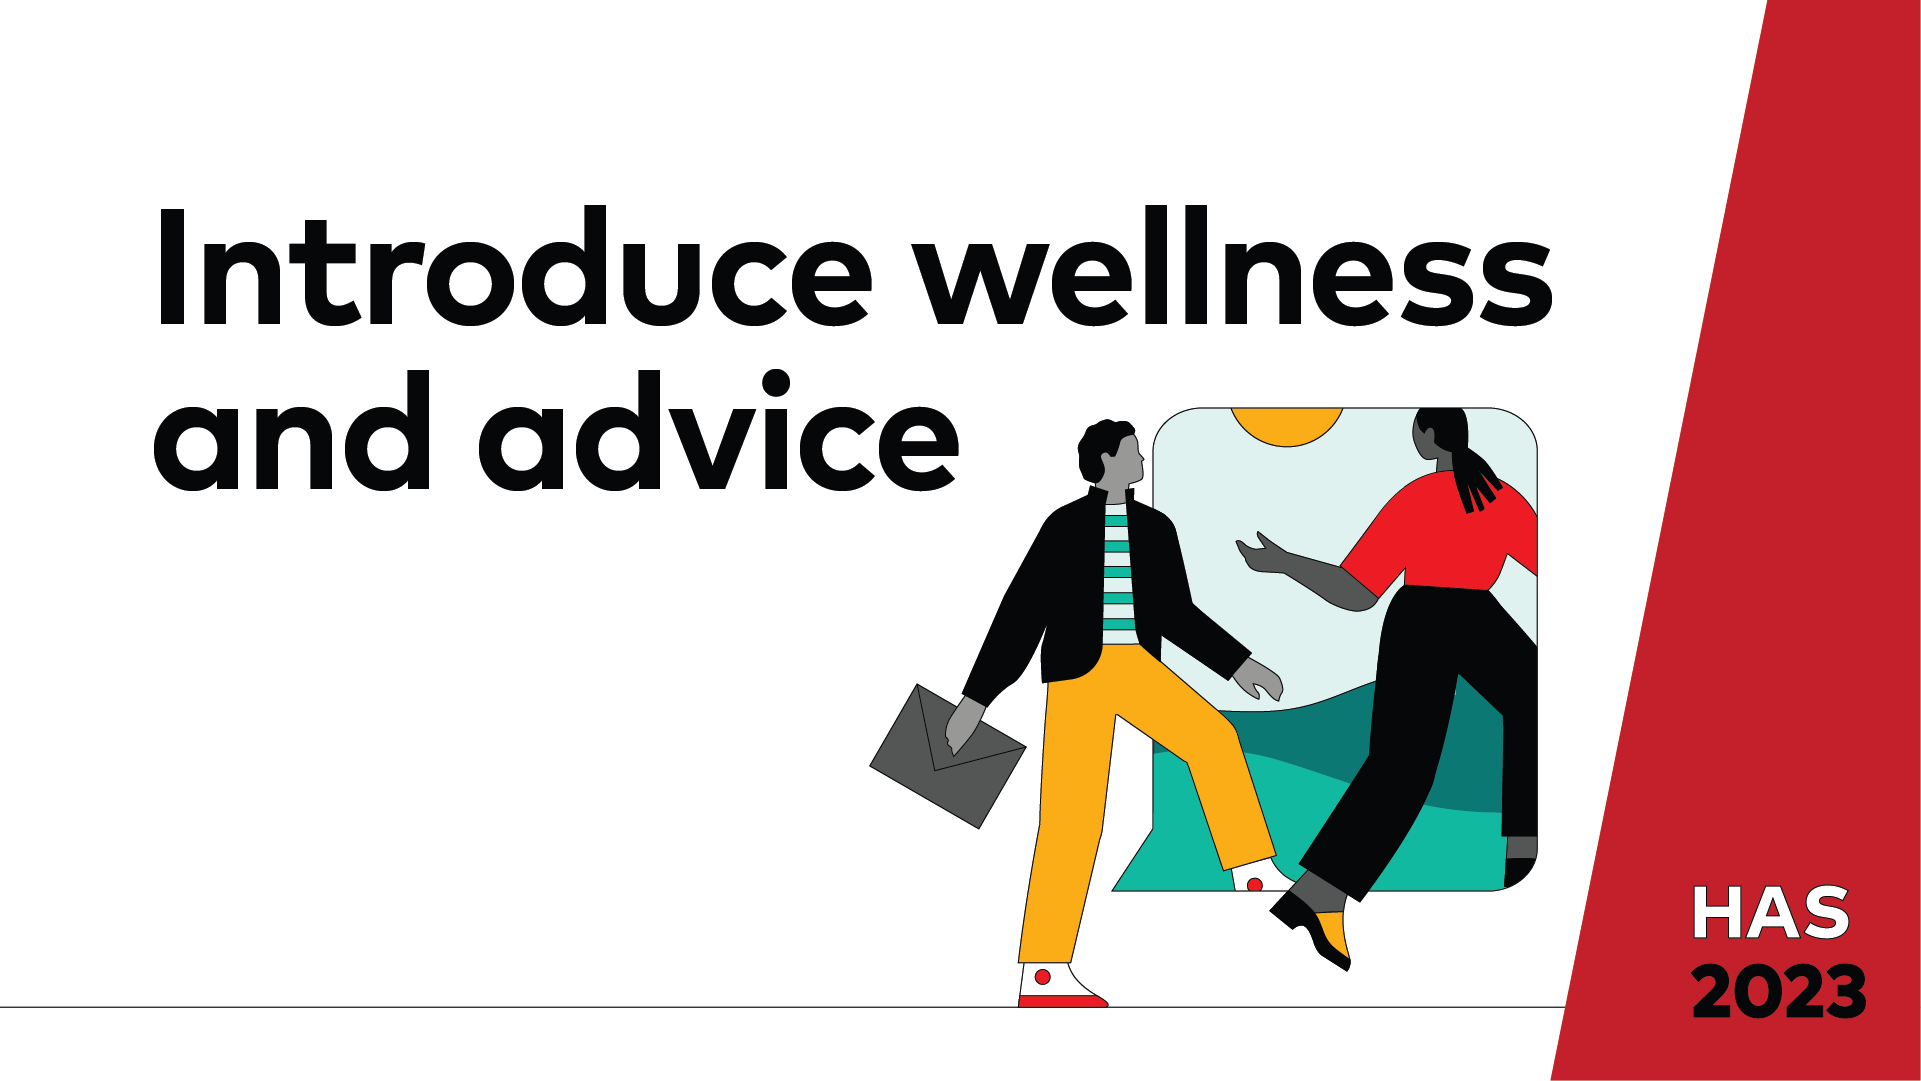 A still image with the title of the accompanying video, “Introduce wellness and advice.” The image is an illustration of one person leading another person through an opening into a land with green, rolling hills and sunshine. There is a link to the video in which Vanguard’s Dina Caggiula and Colton Fisher discuss how Vanguard’s wellness and advice features and services can help improve financial well-being.  